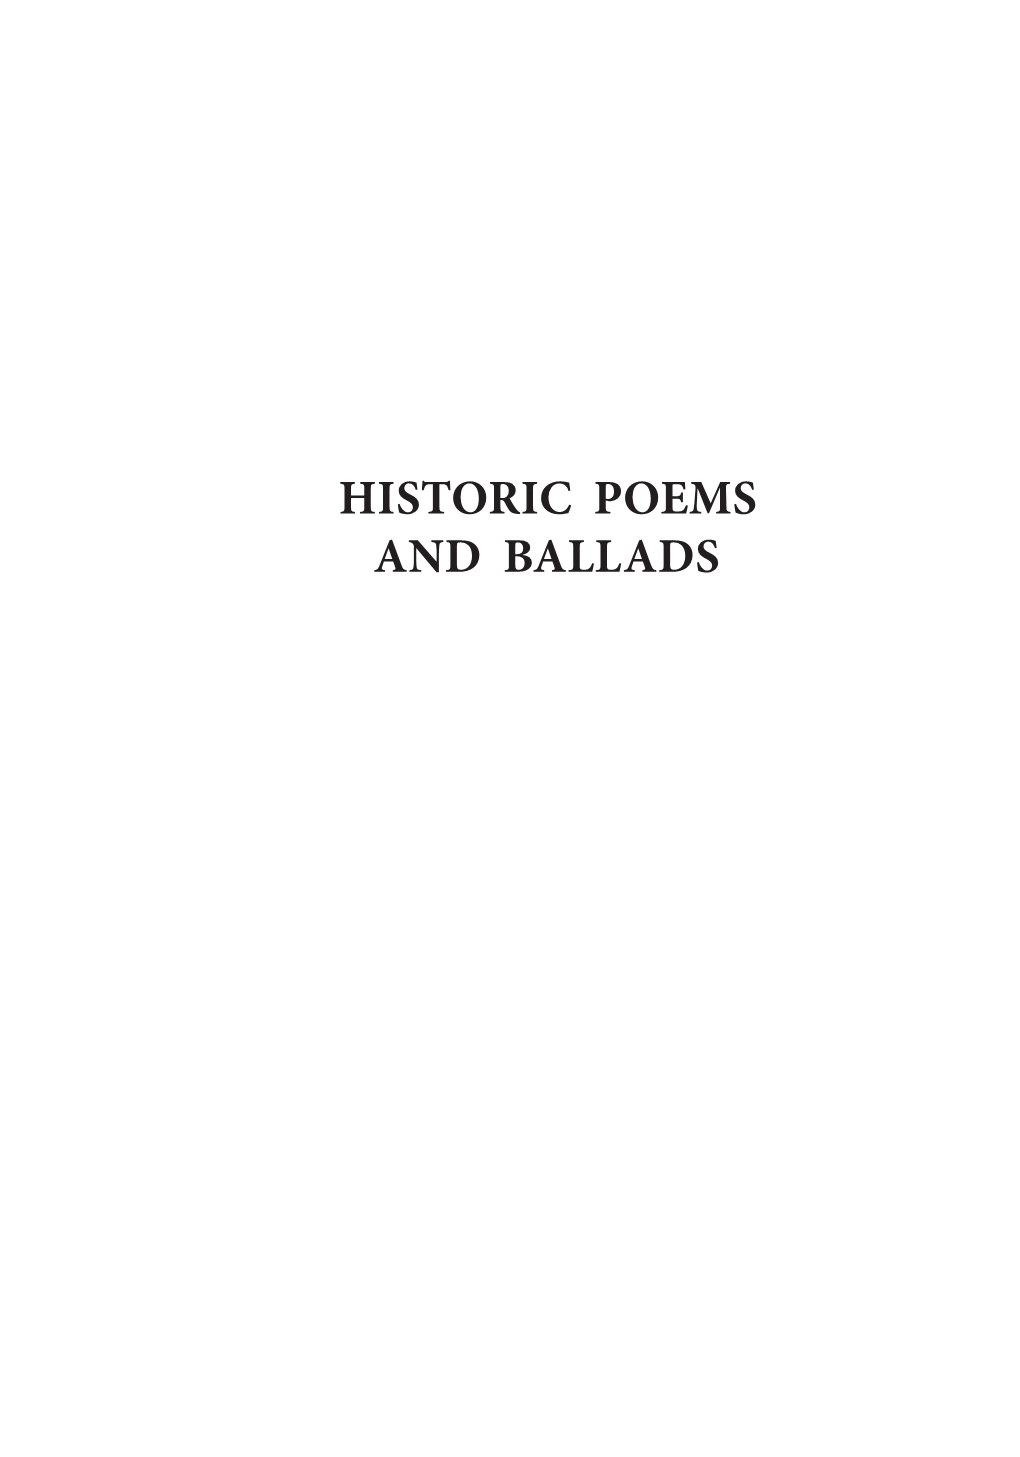 Historic Poems and Ballads by Rupert S. Holland